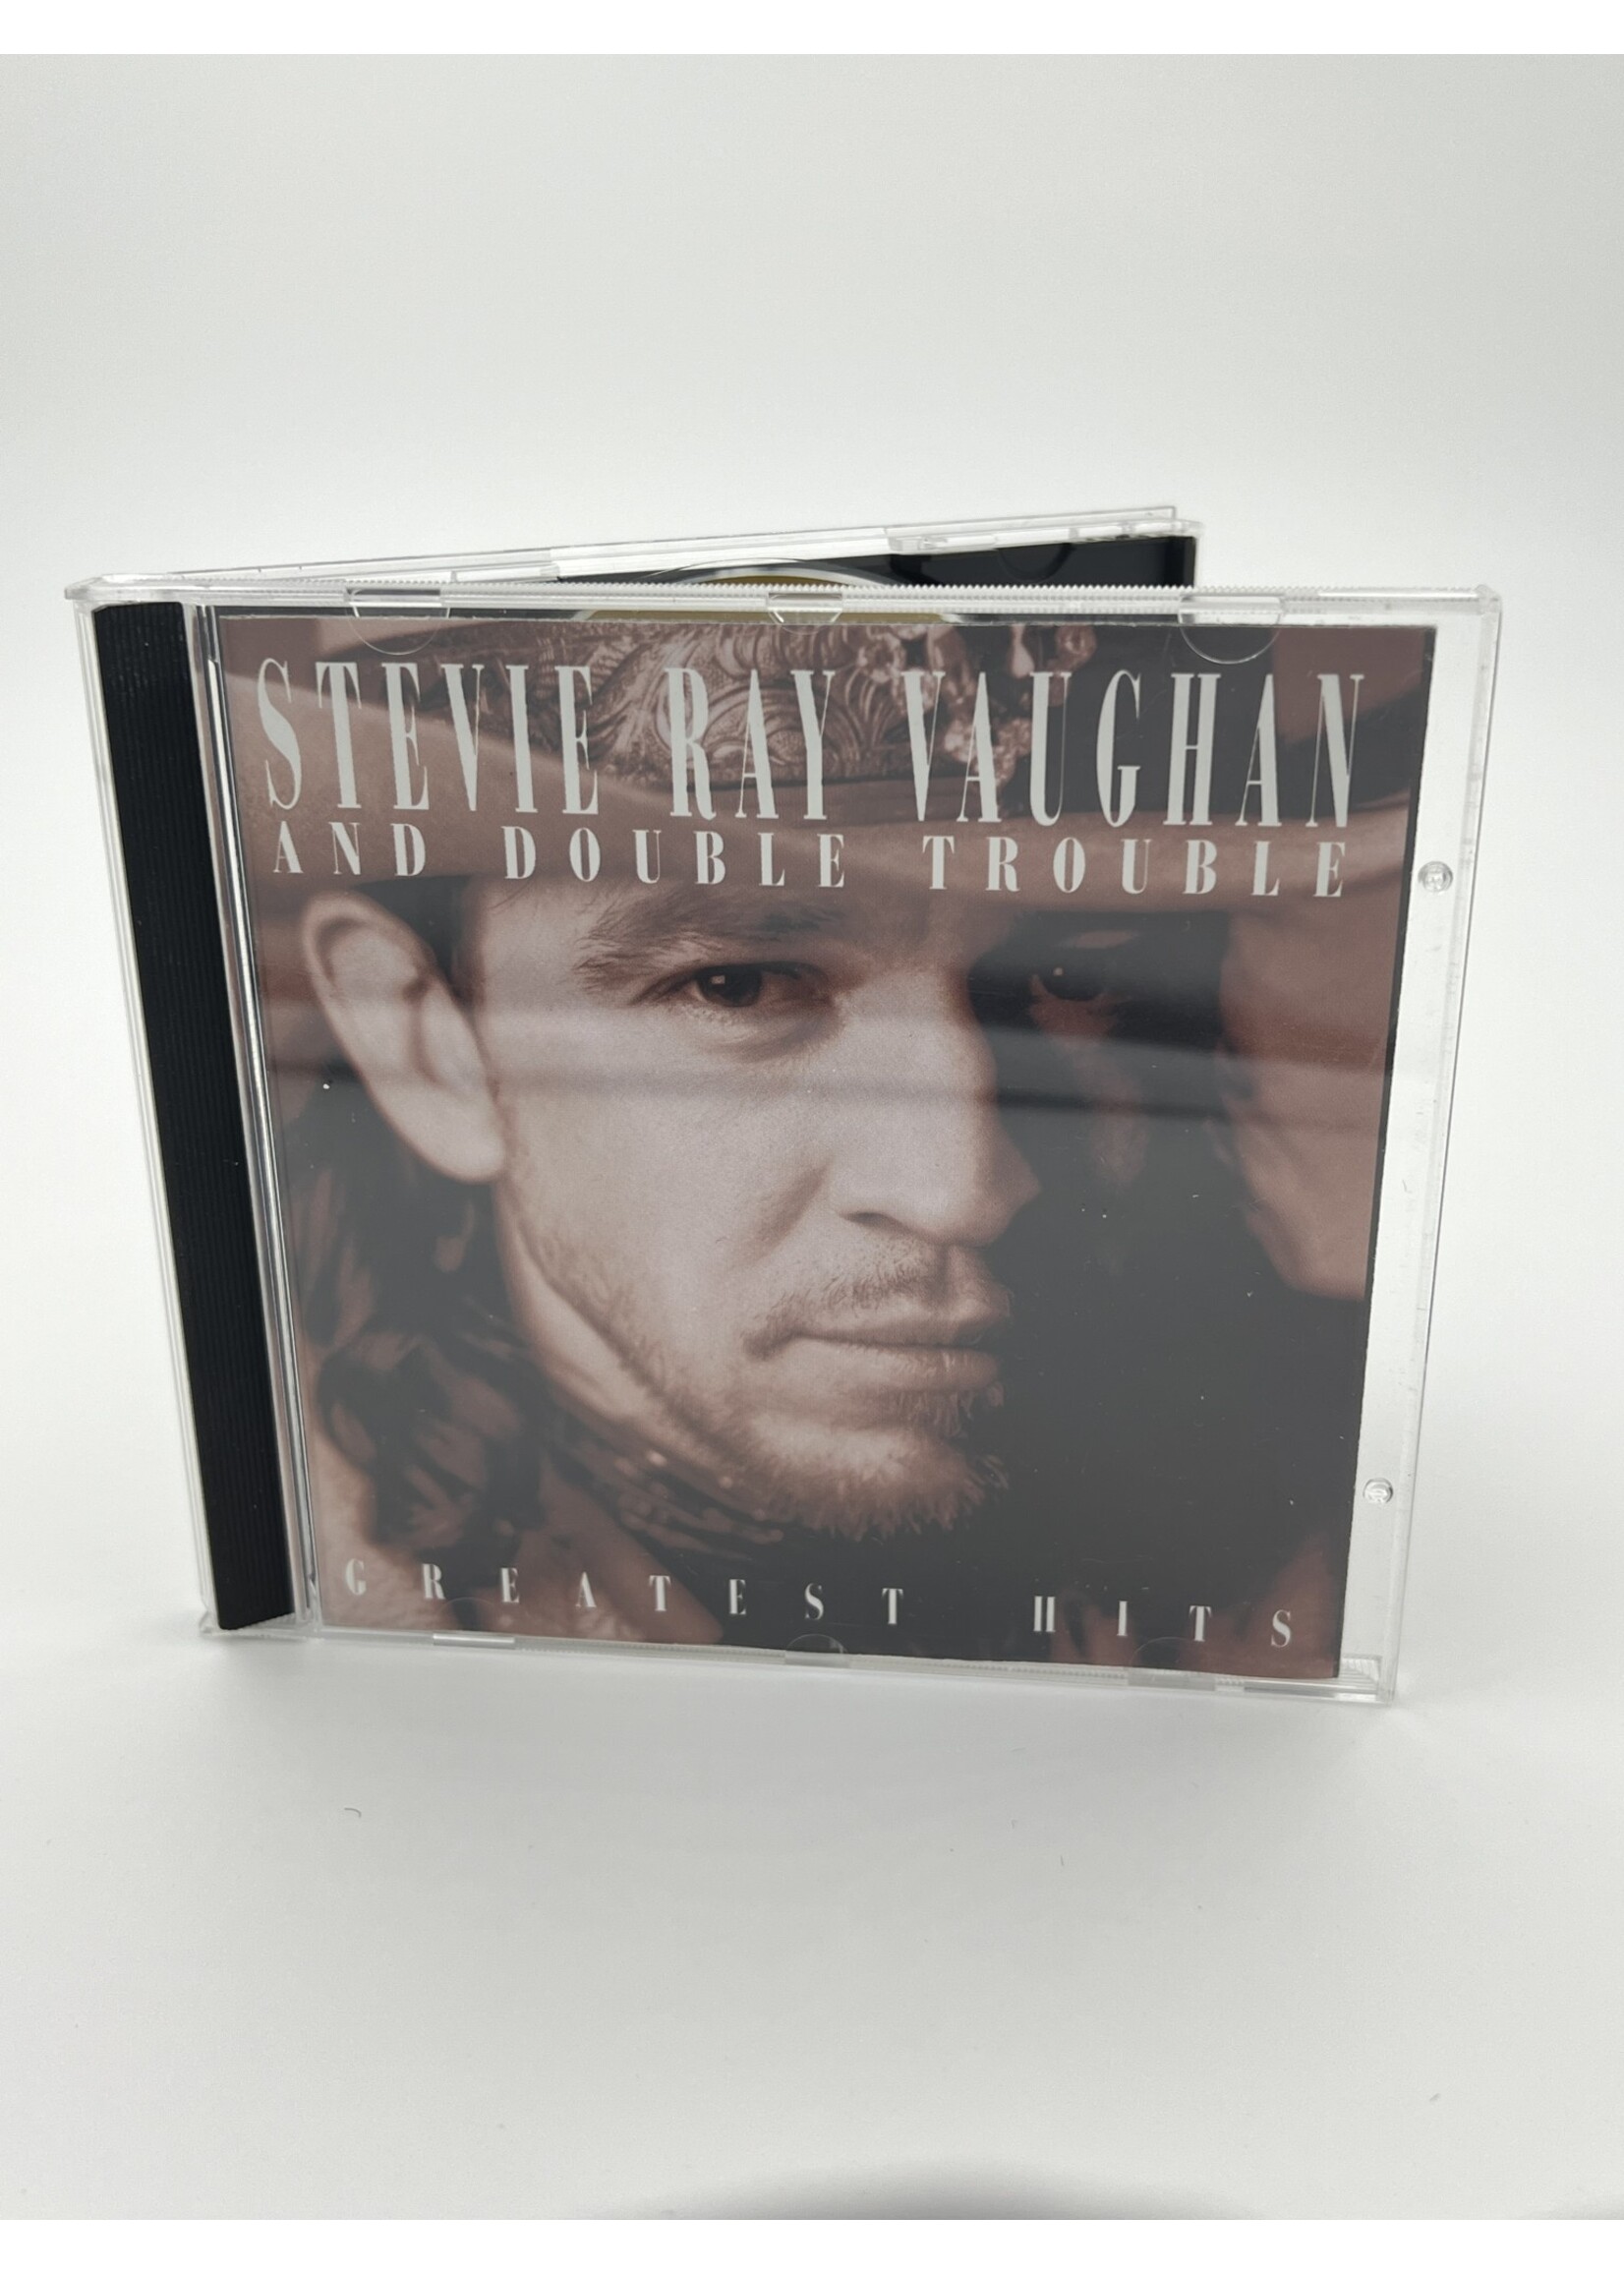 CD Stevie Ray Vaughan And Double Trouble Greatest Hits CD